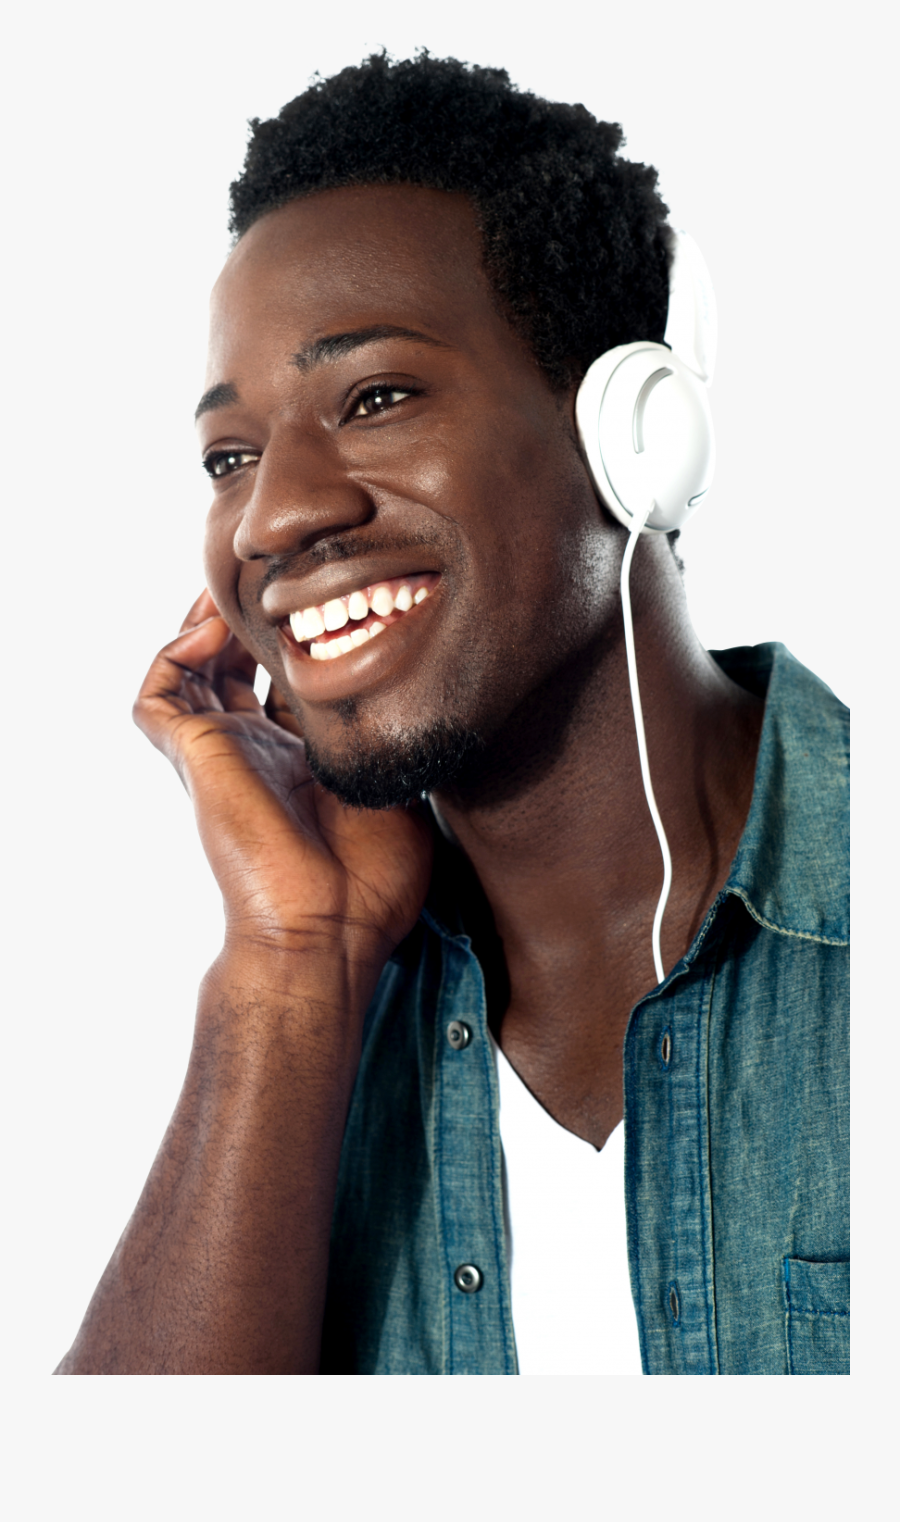 Listening Music Png Image - Listening Music Png, Transparent Clipart